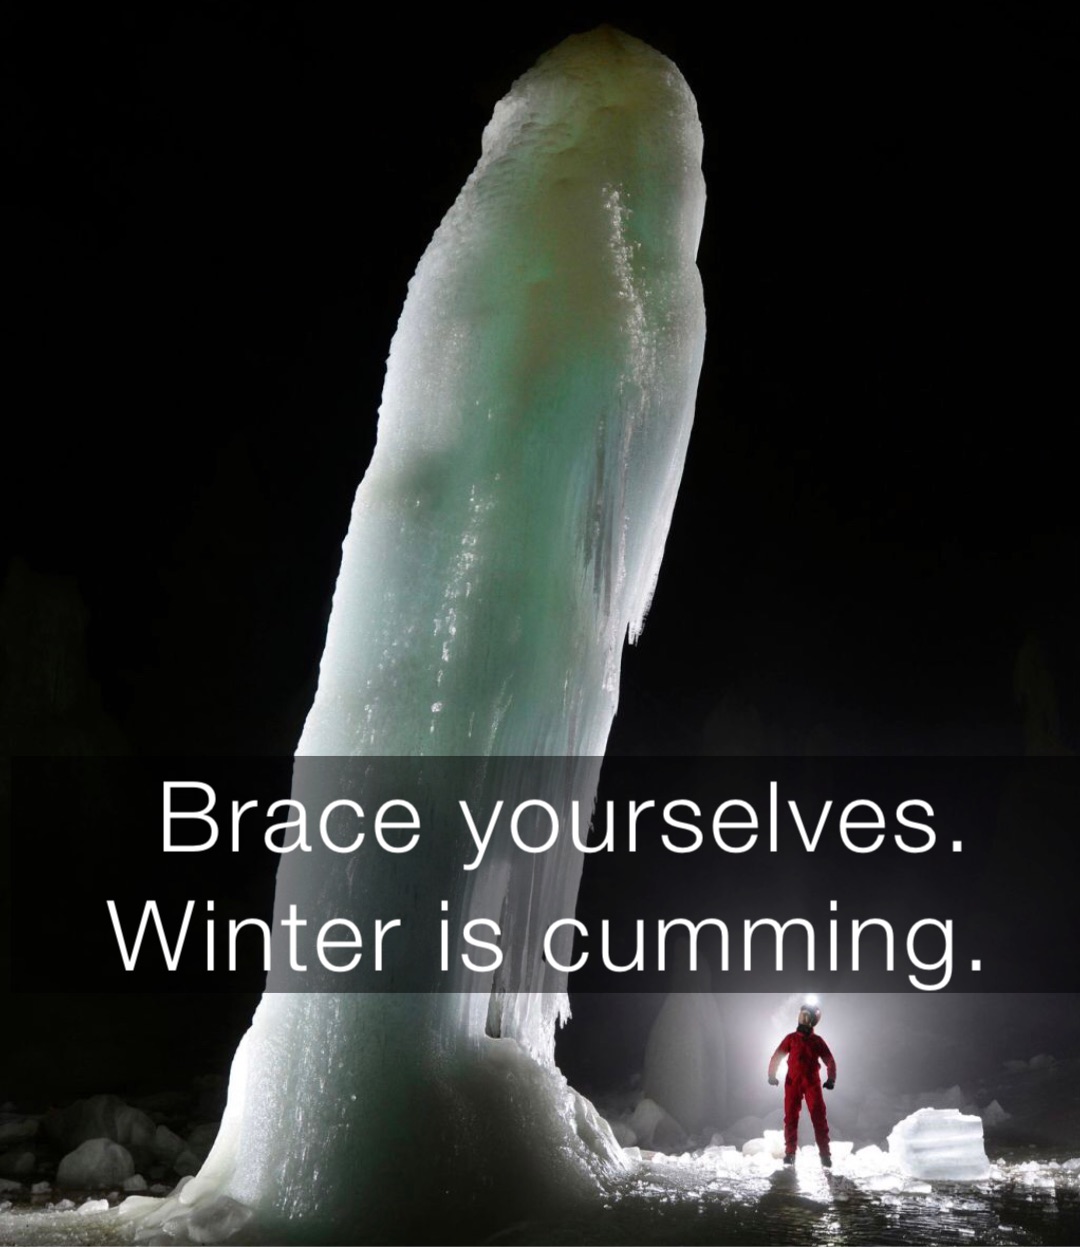 Brace yourselves. Winter is cumming.